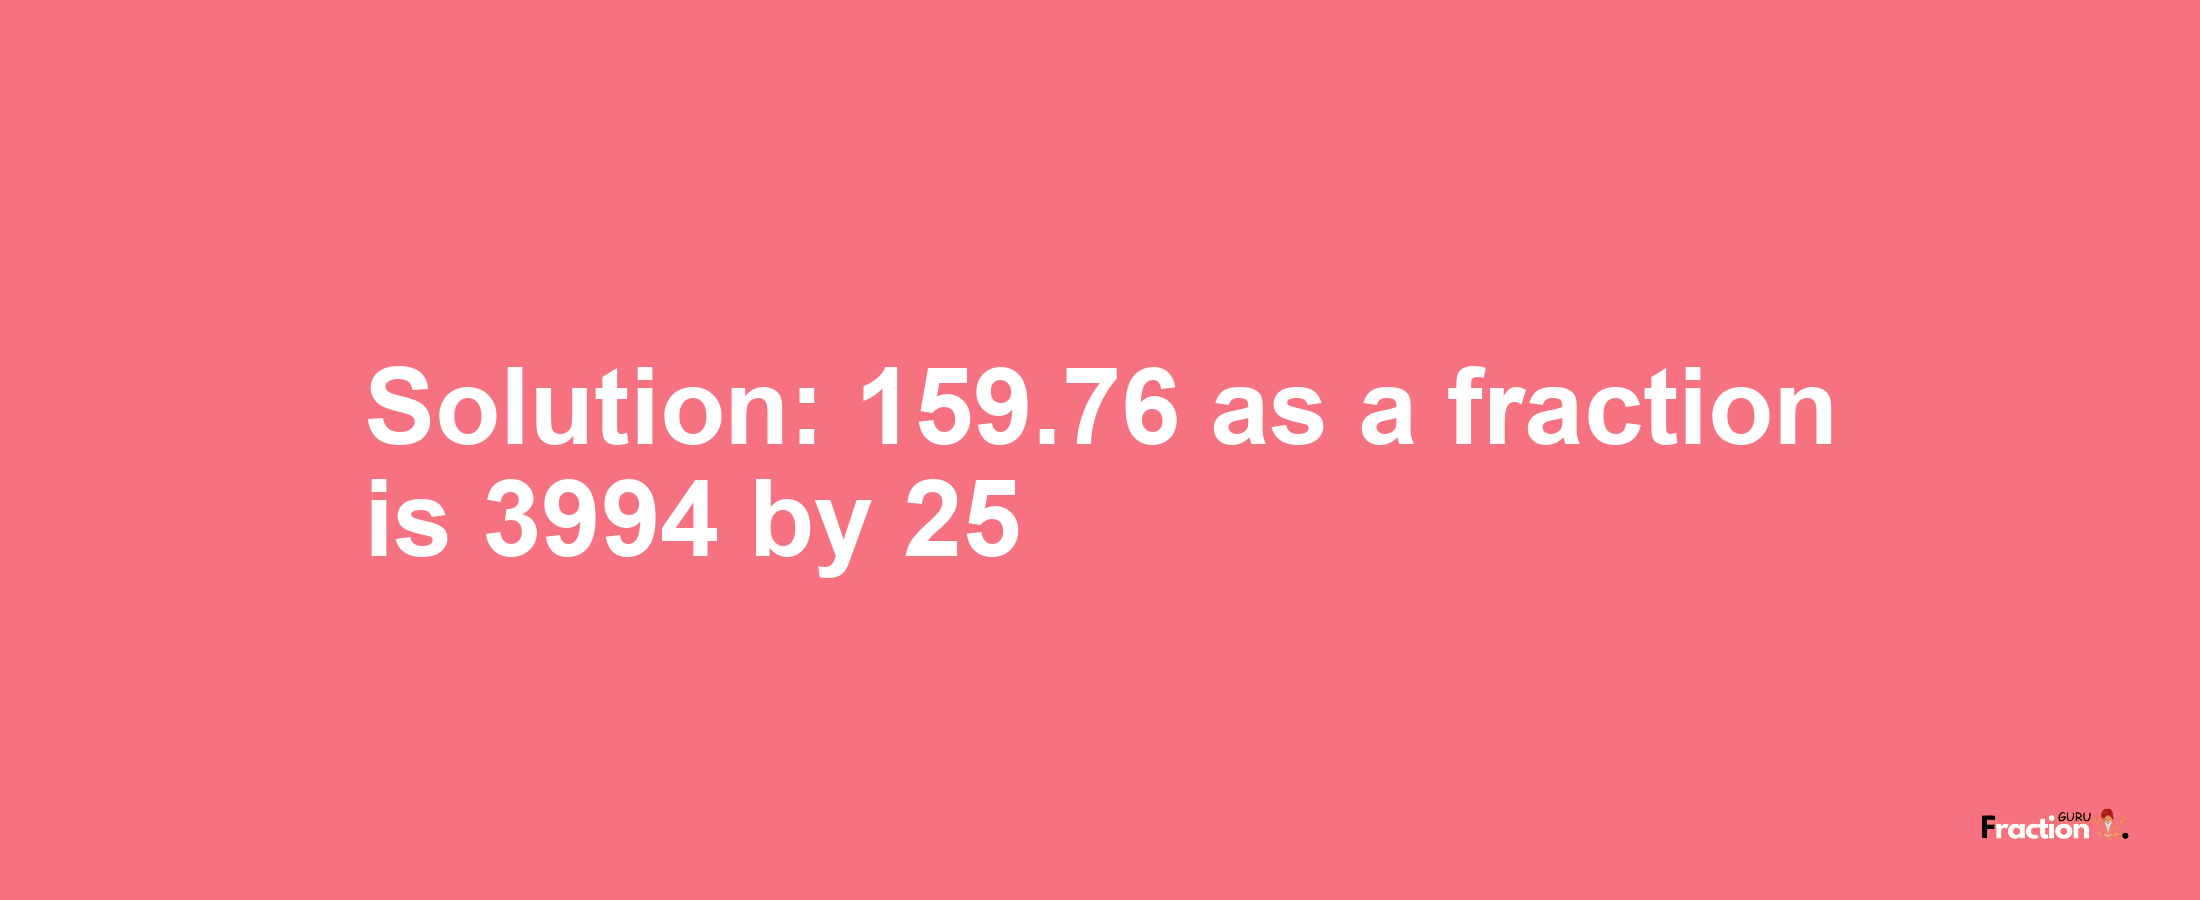 Solution:159.76 as a fraction is 3994/25